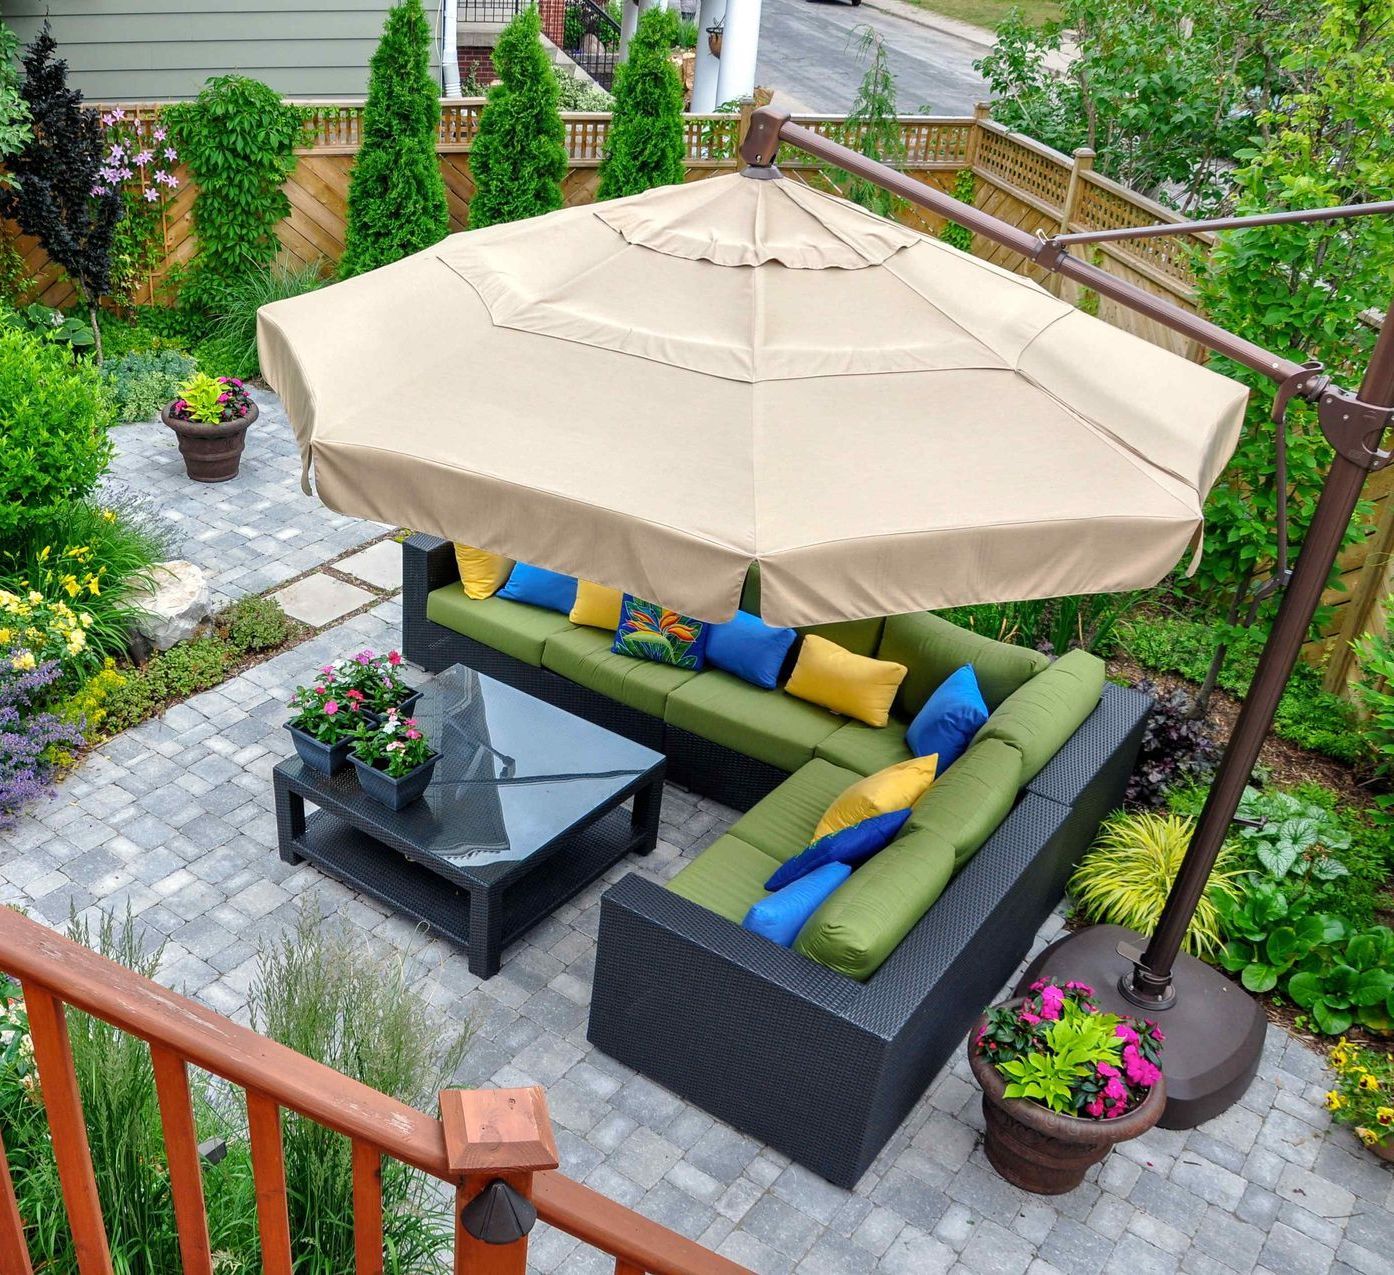 An aerial view of a beautiful hardscape with seating and an umbrella for lounging.